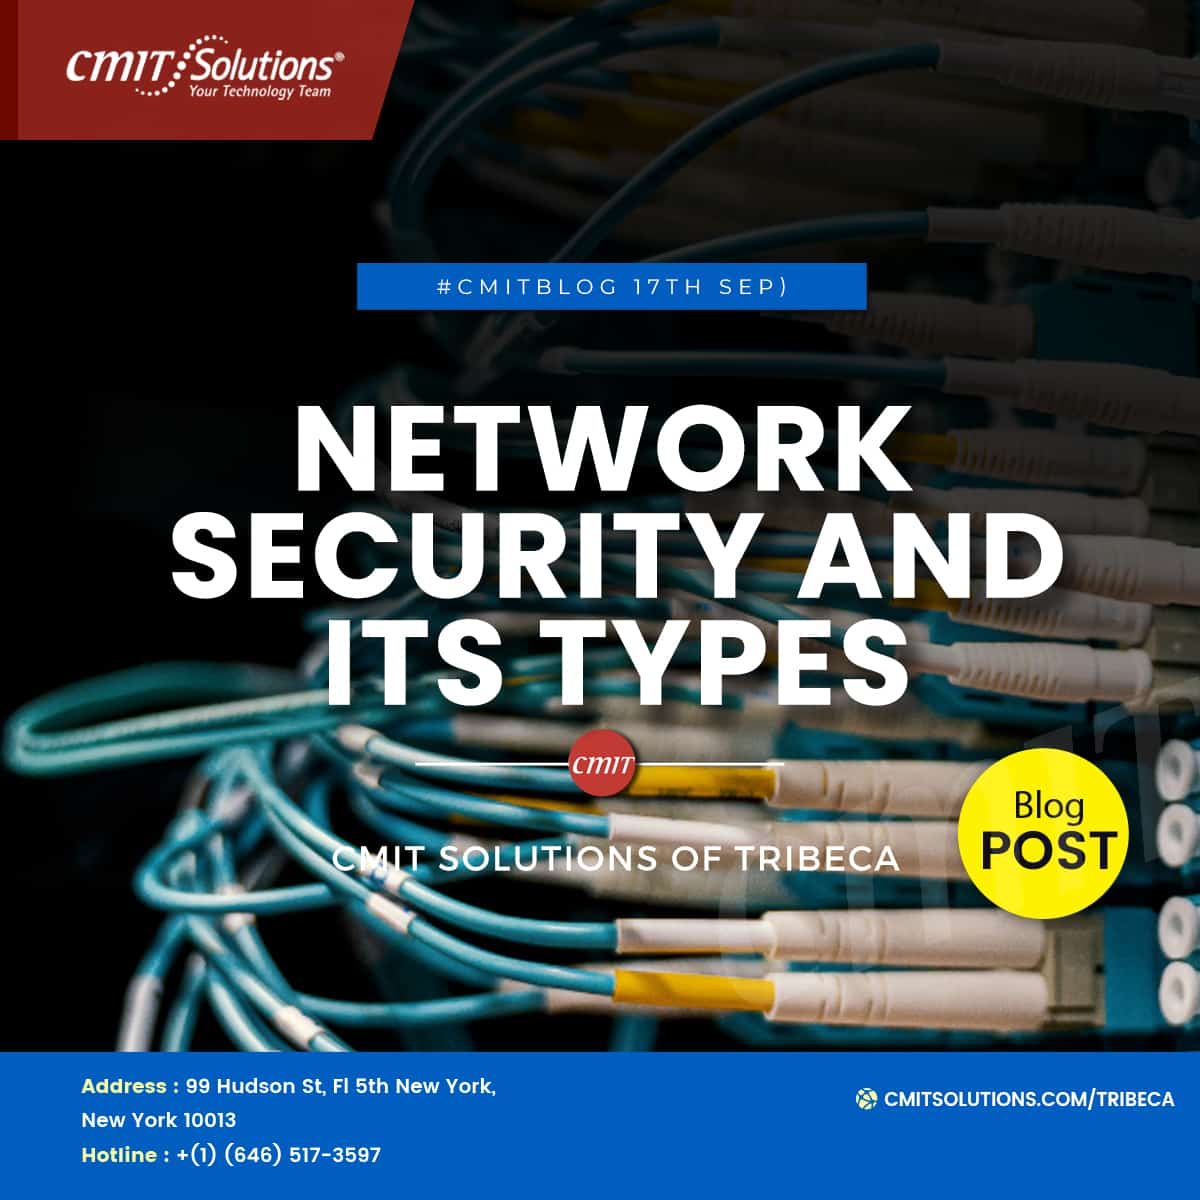 Network security and its types